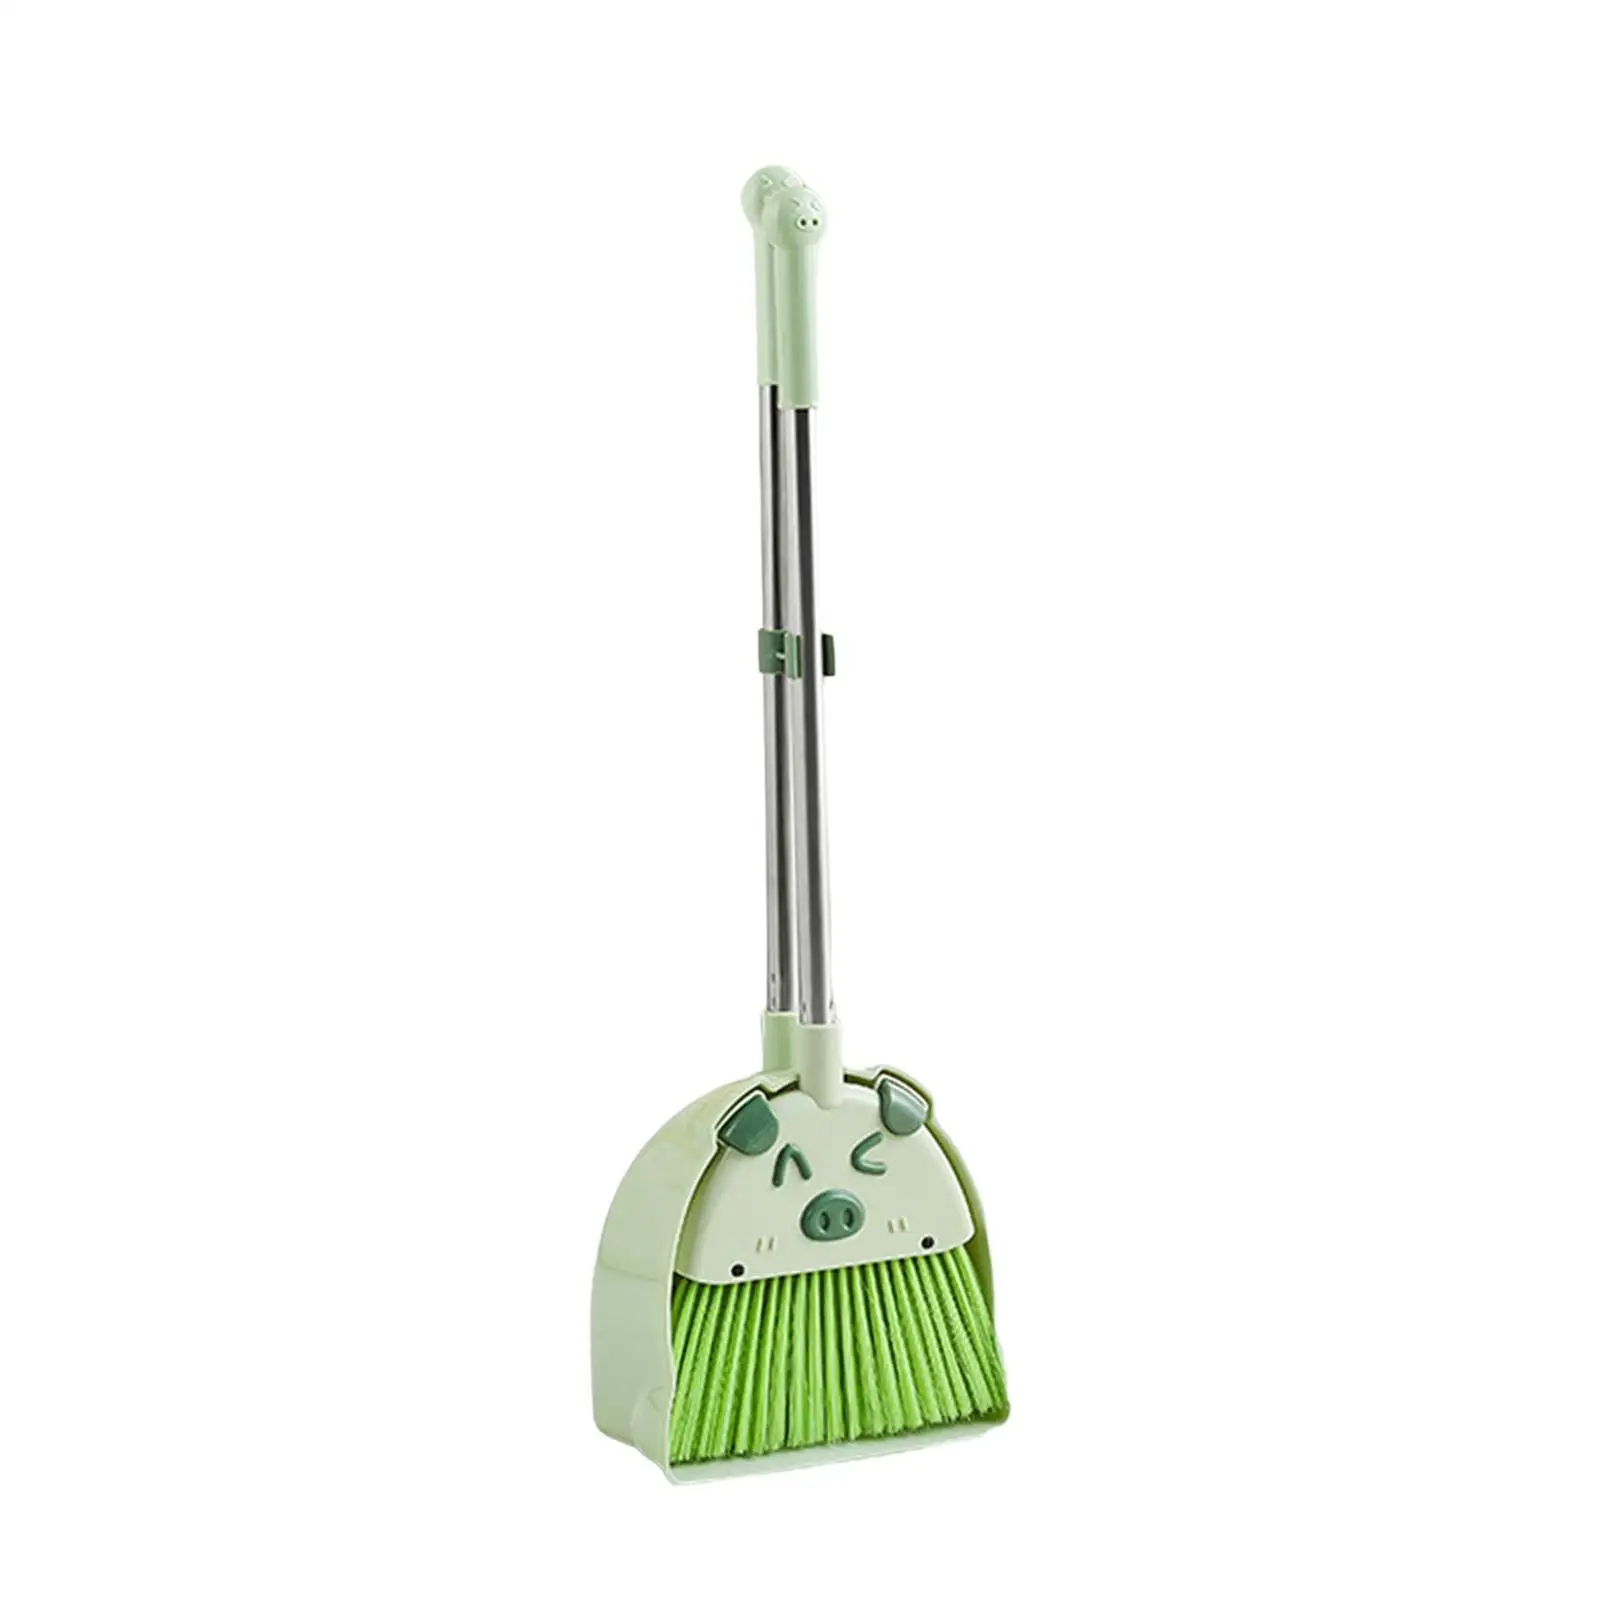 Mini Broom with Dustpan Little Housekeeping Helper Set House Cleaning Gifts Cleaning Sweeping Play Set for Girls Birthday Gifts